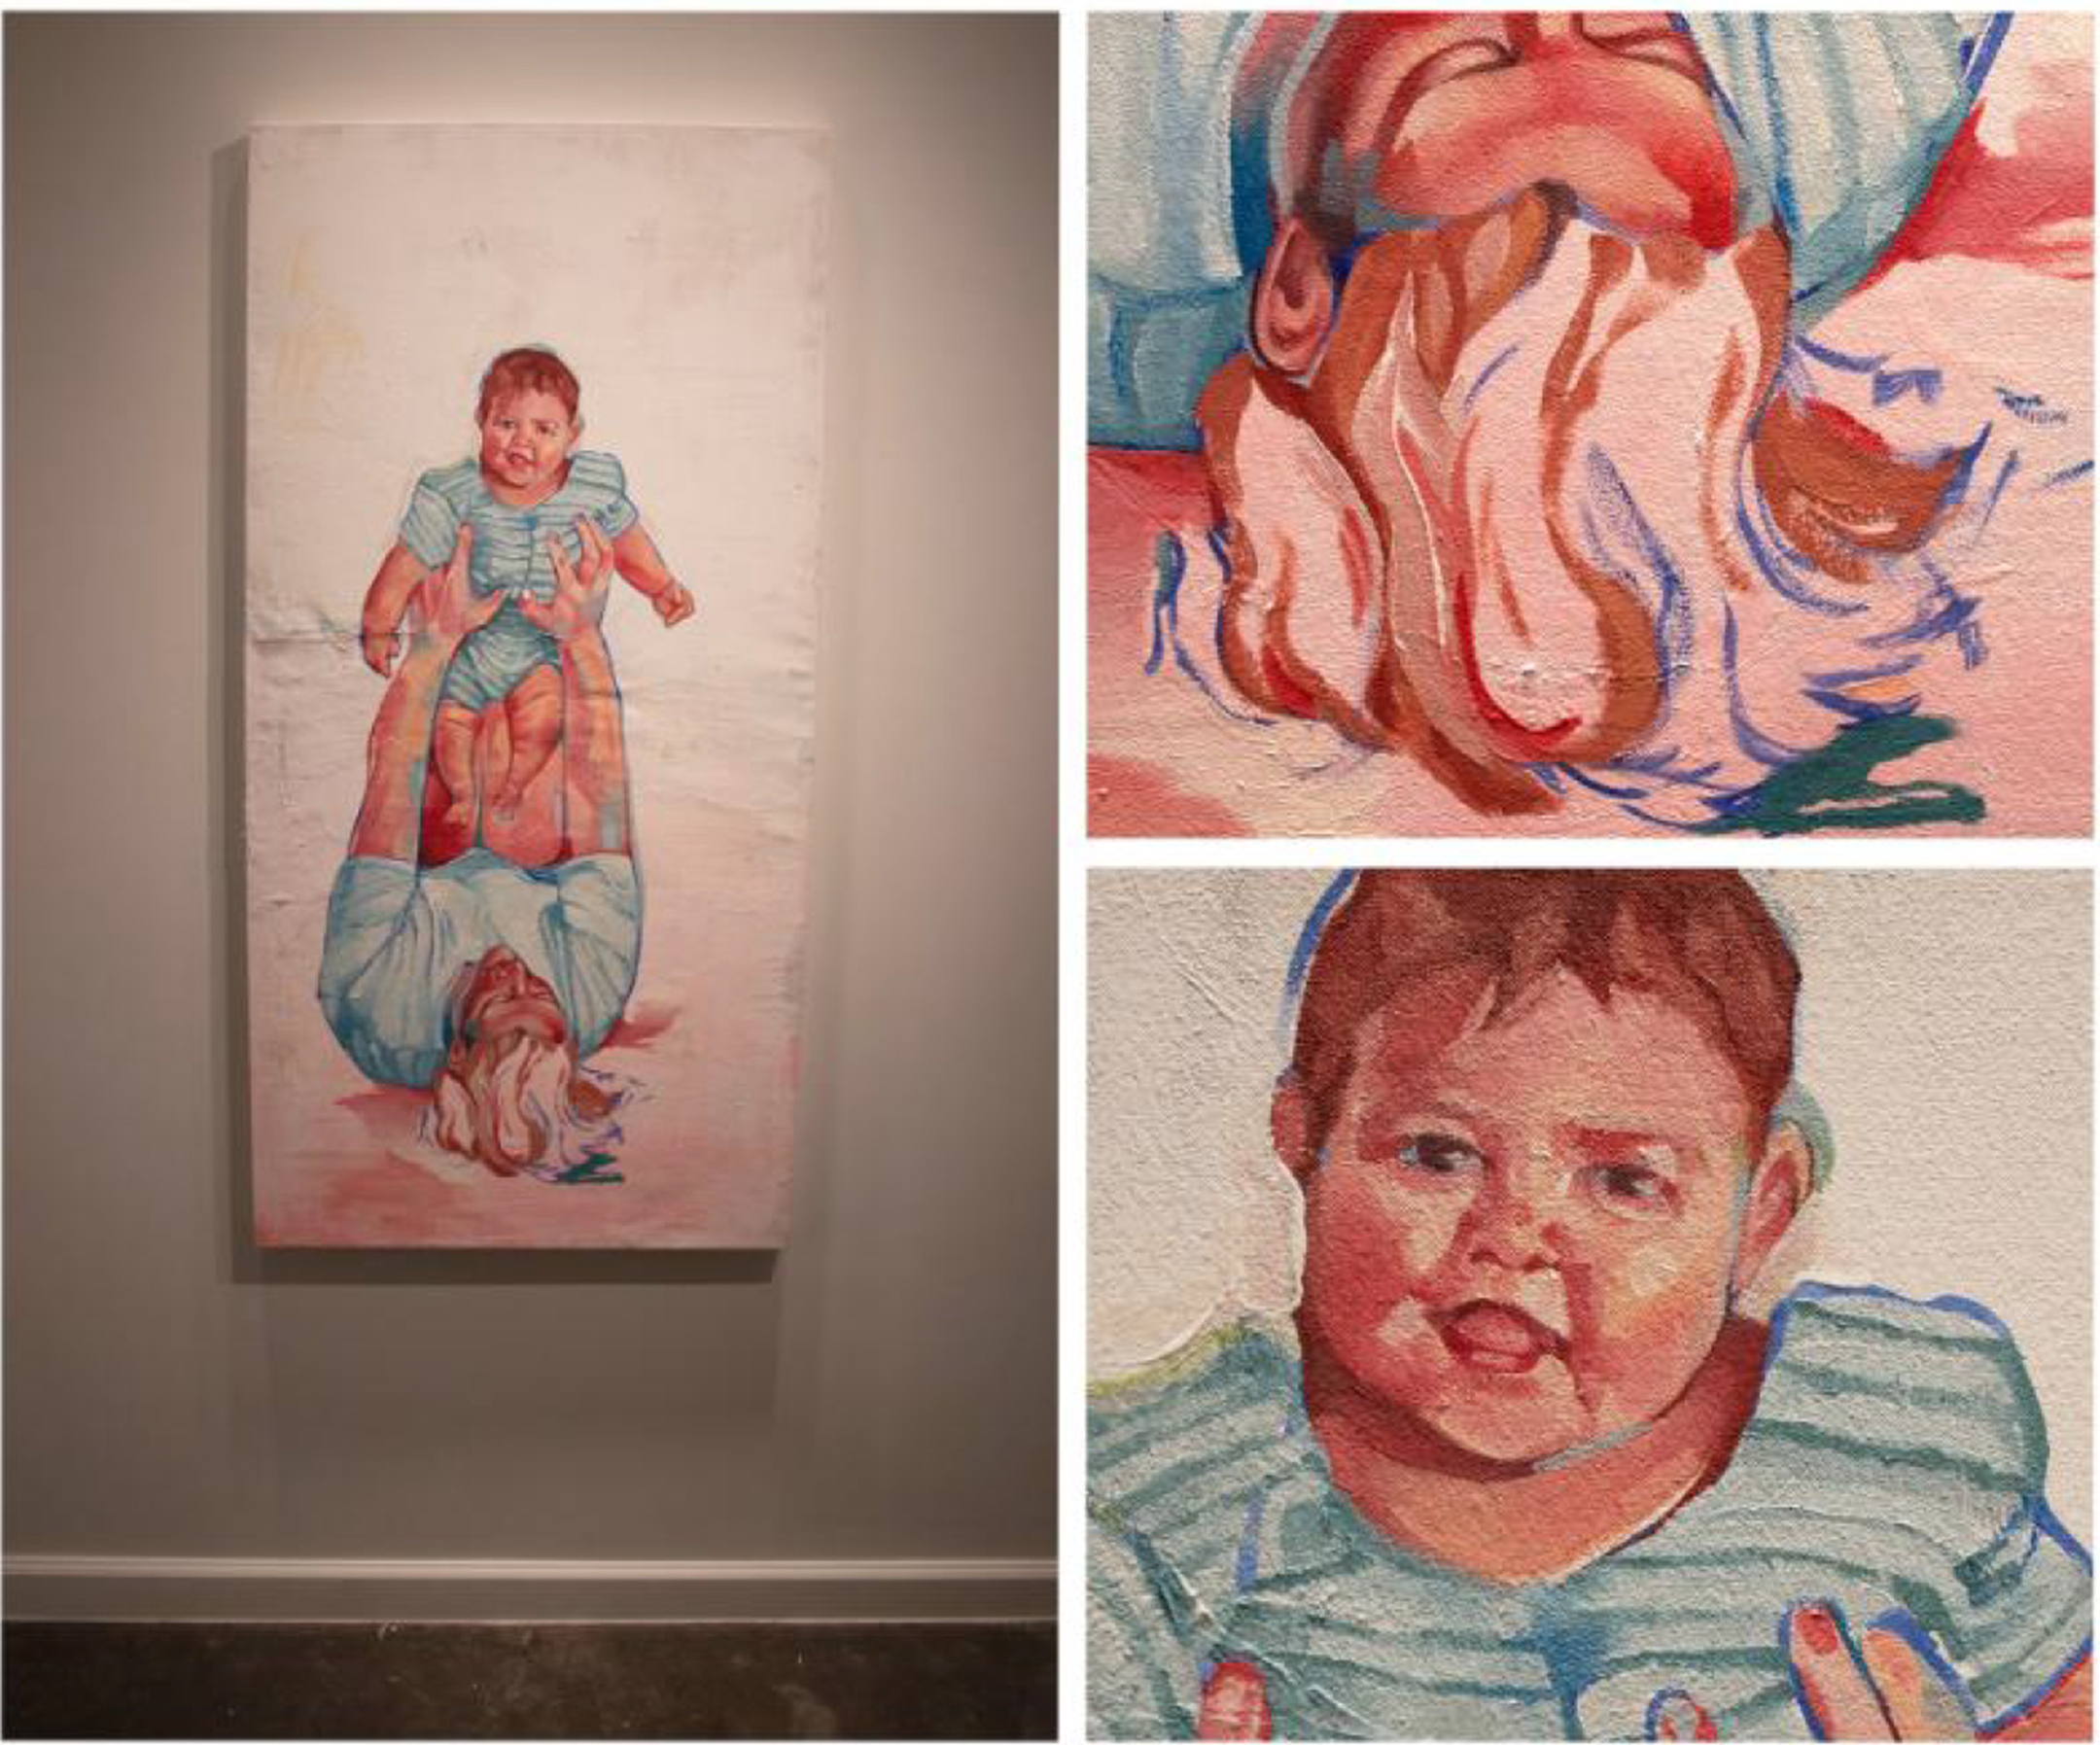 Painting of a woman on her back holding up a smiling baby, done in pinks and blues, with a close up of the baby on the right